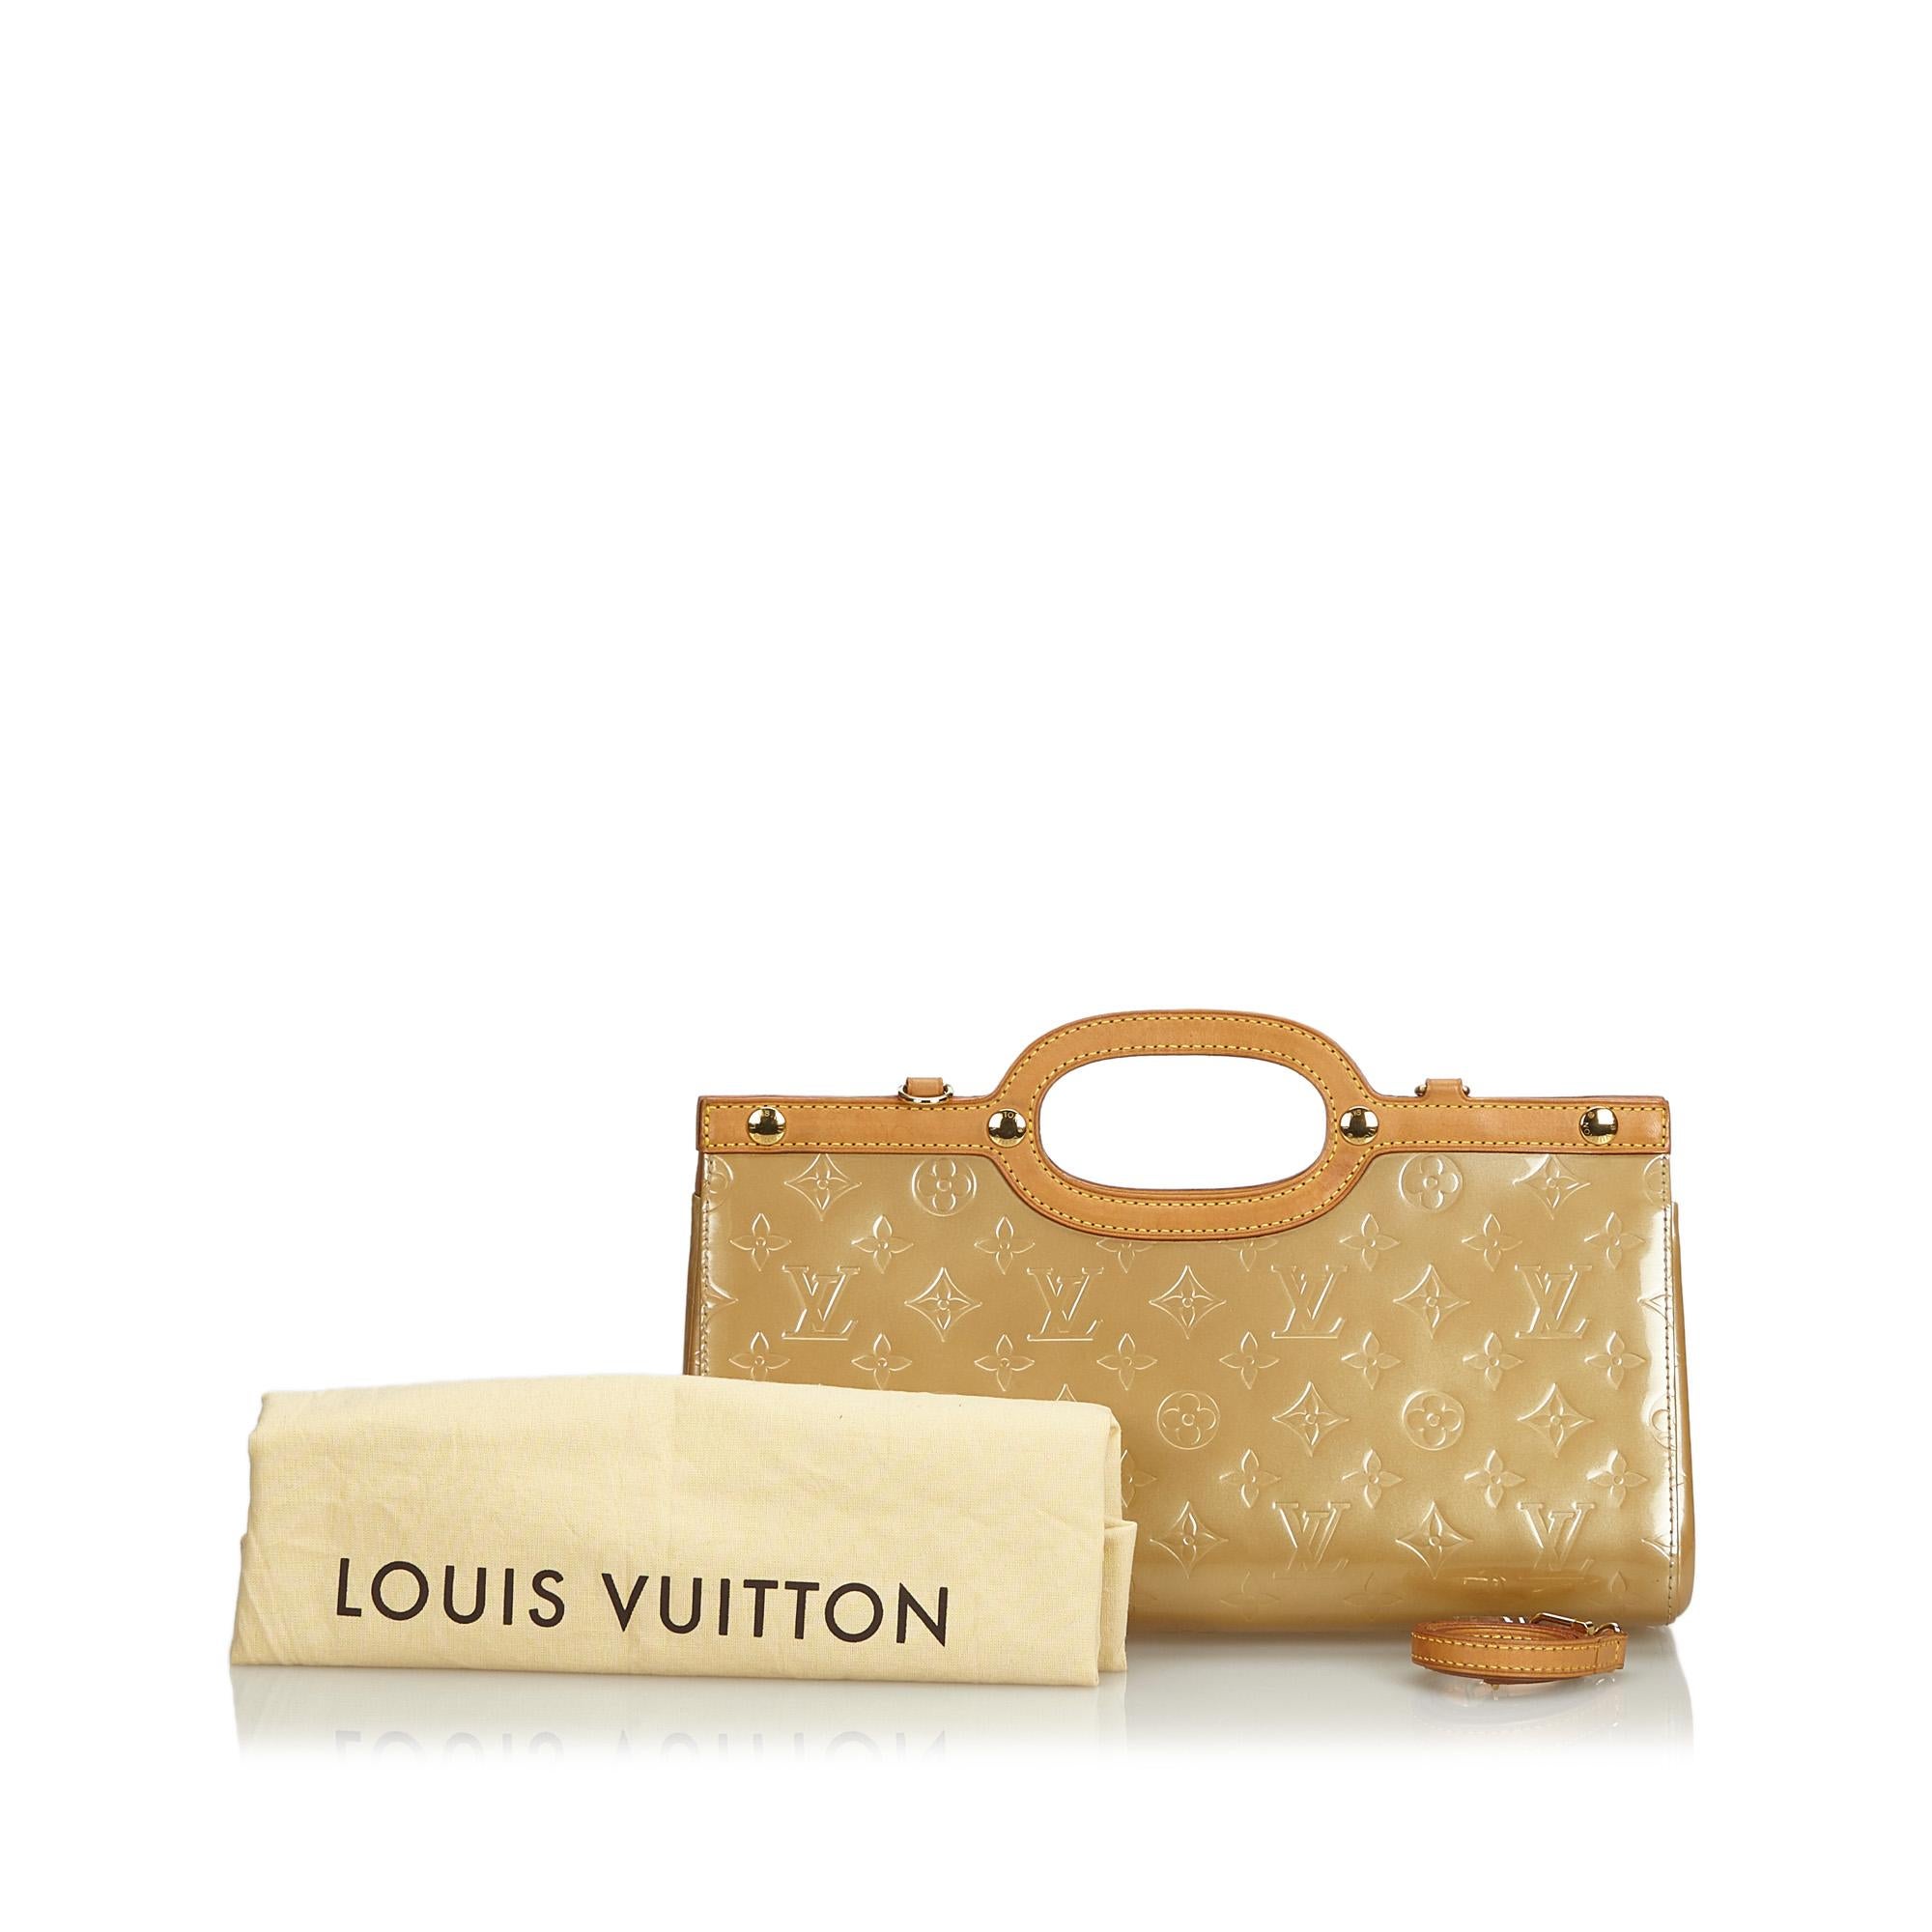 Louis Vuitton Brown Beige Vernis Leather Leather Vernis Roxbury Drive Spain For Sale 6